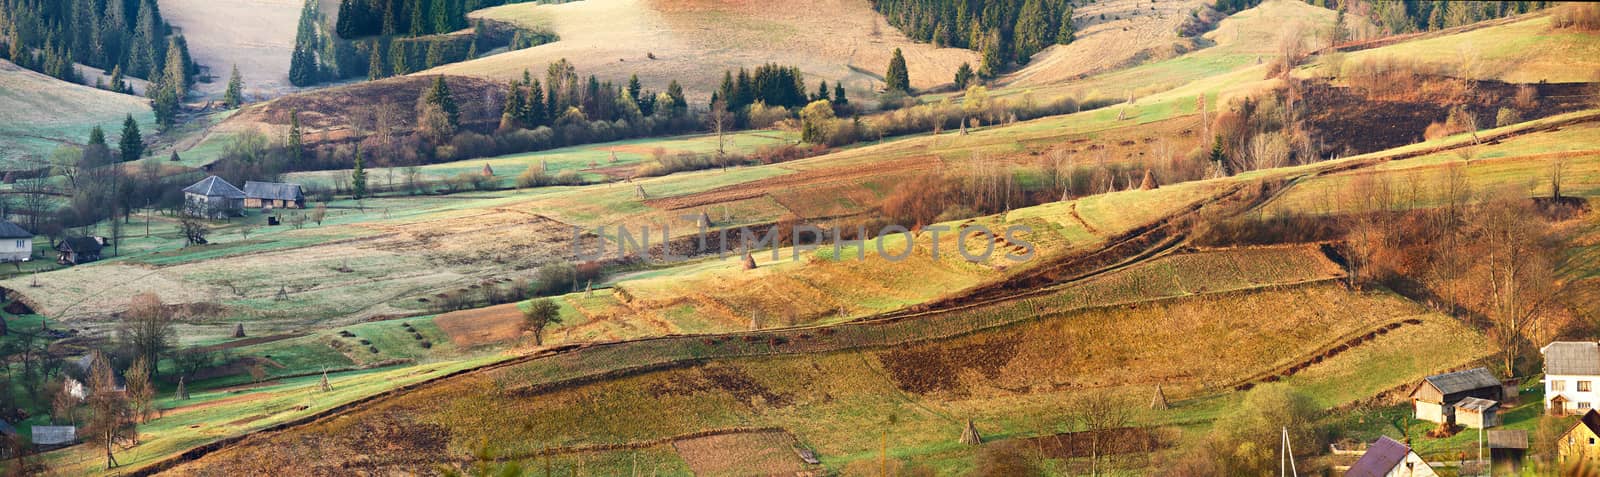 Small village on alpine hills in spring. Spring panoramic landscape of sunny alpine morning. mountain village spring panorama. Beautiful rural scene. Village in the valley. Agricultural field on hillsides in mountains in morning light